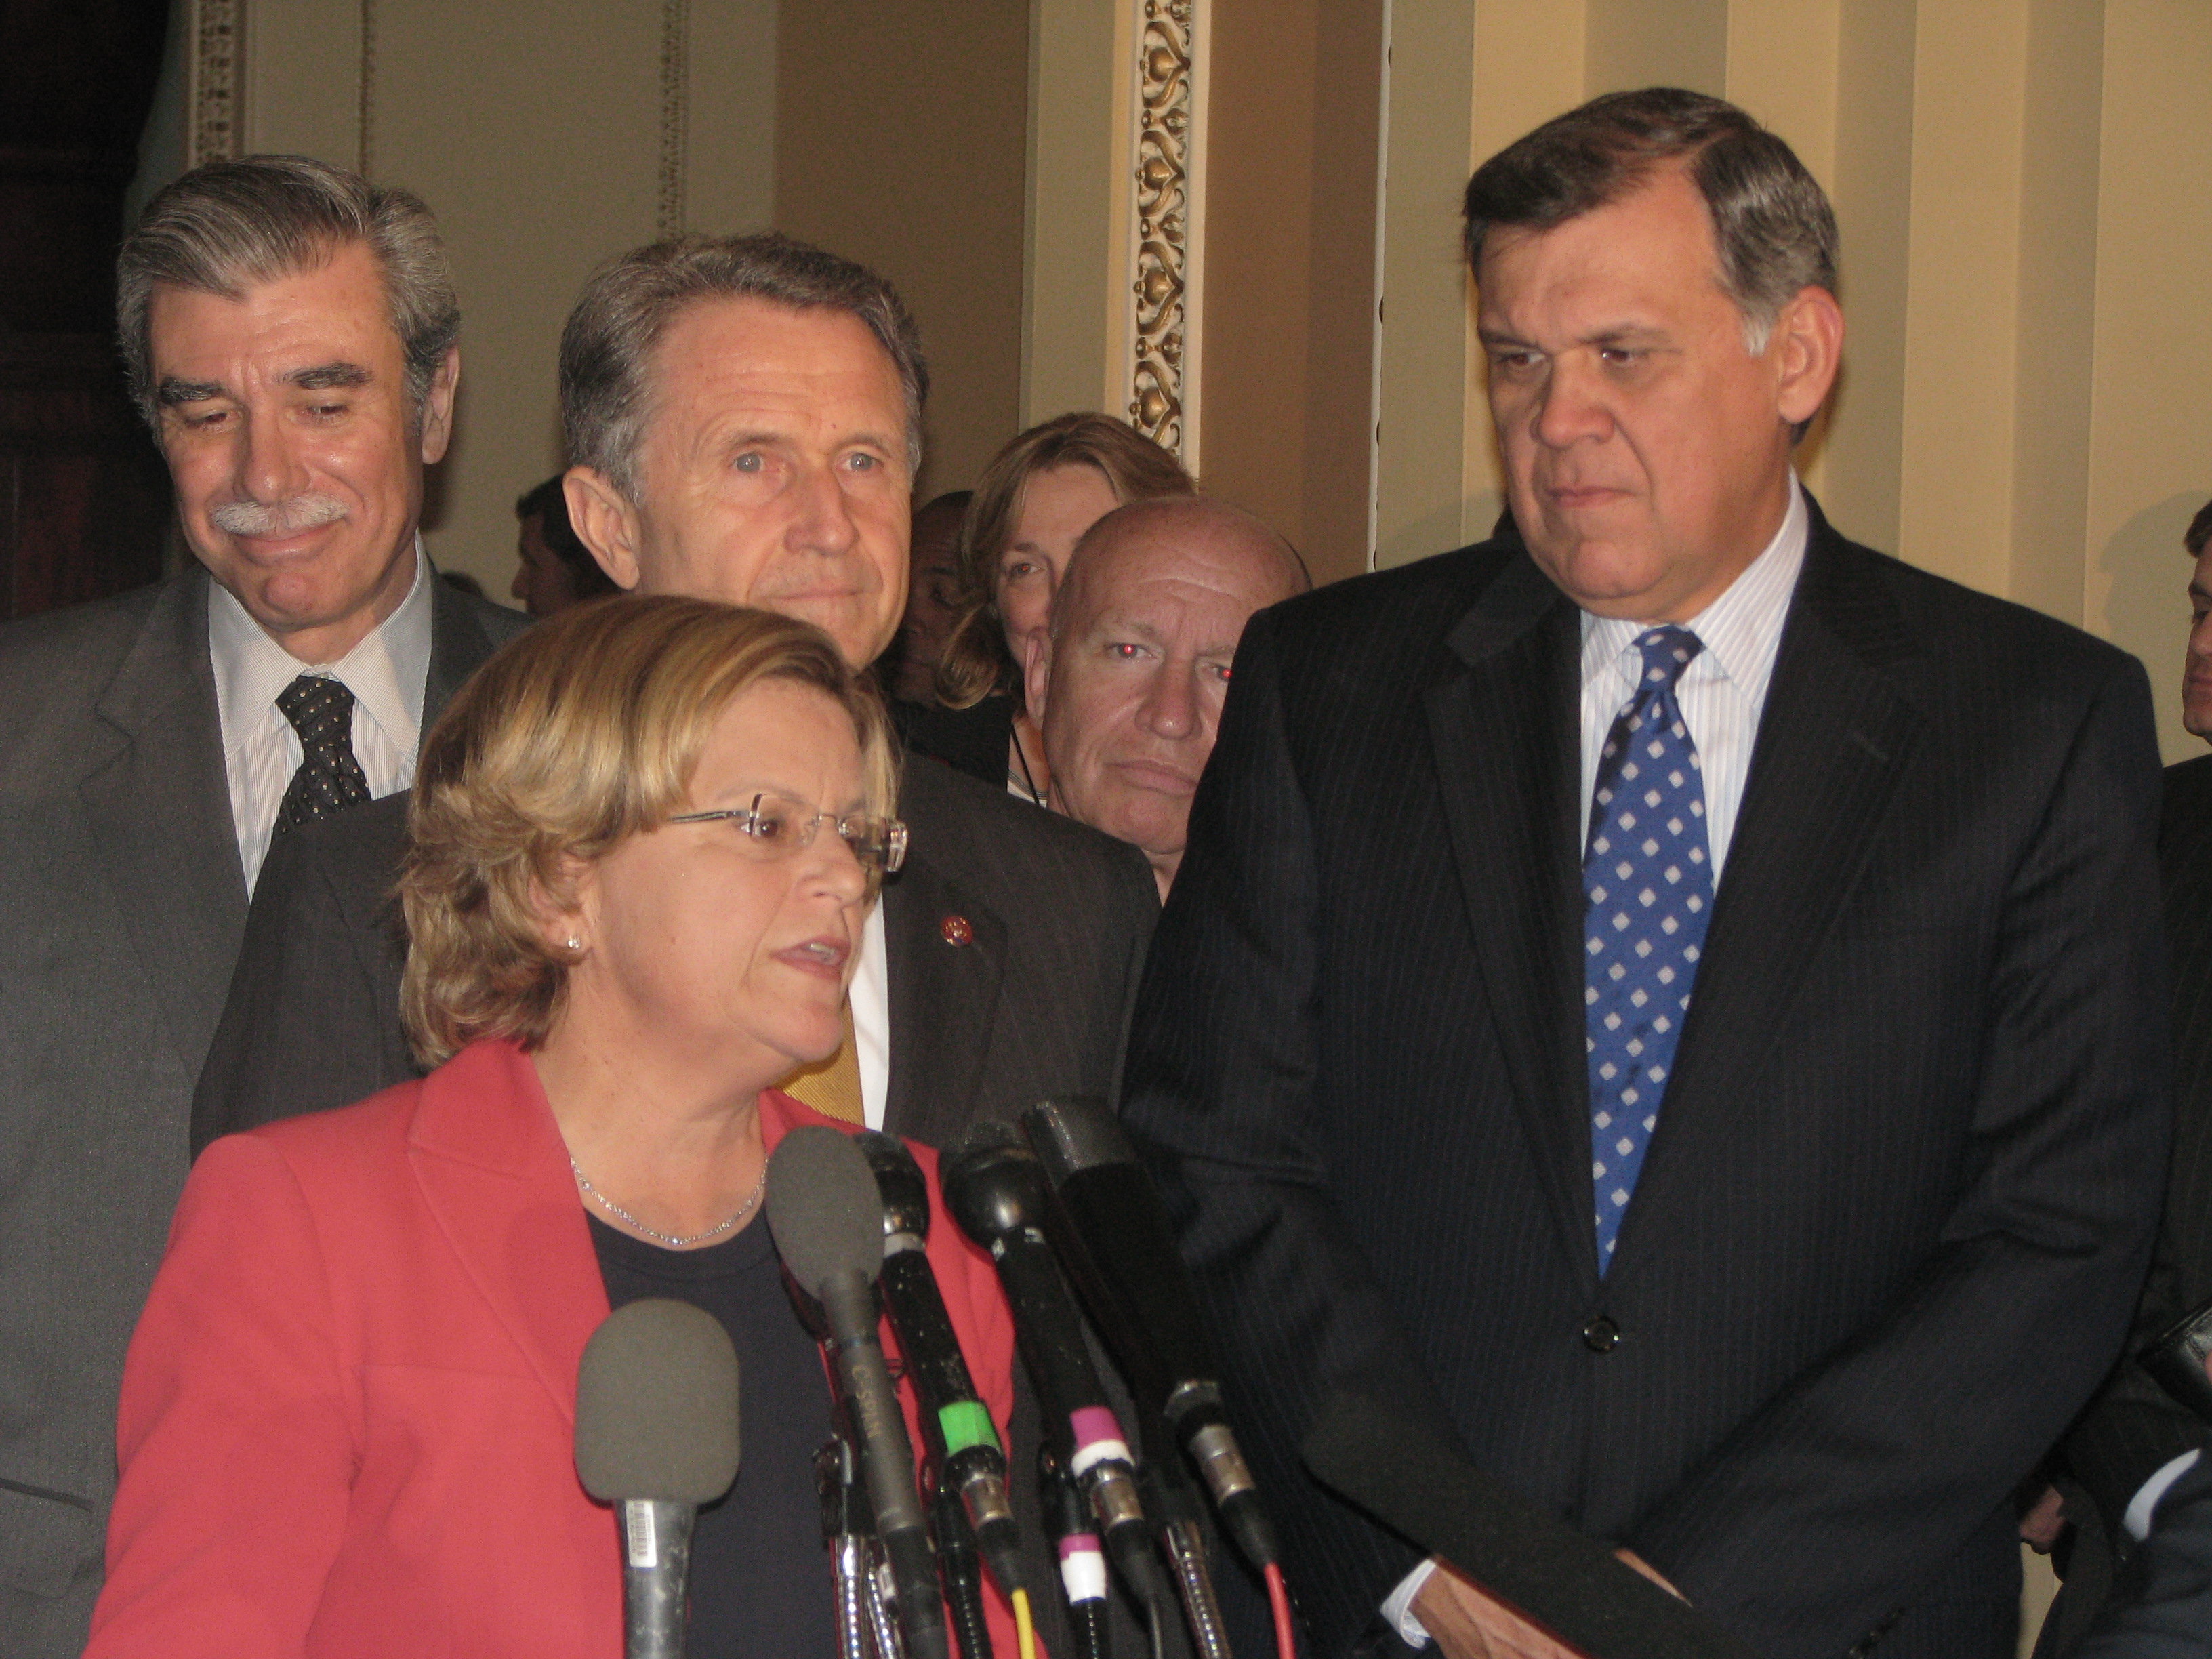 U.S. Rep. Ileana Ros-Lehtinen, Ranking Republican on the House Foreign Affairs Committee, urges Congressional passage of the U.S.-Colombia Free Trade Agreement while accompanied by U.S. Sen. Mel Martinez (R-FL), U.S. Rep. Wally Herger (R-CA) and Secretary of Commerce Carlos Gutierrez.